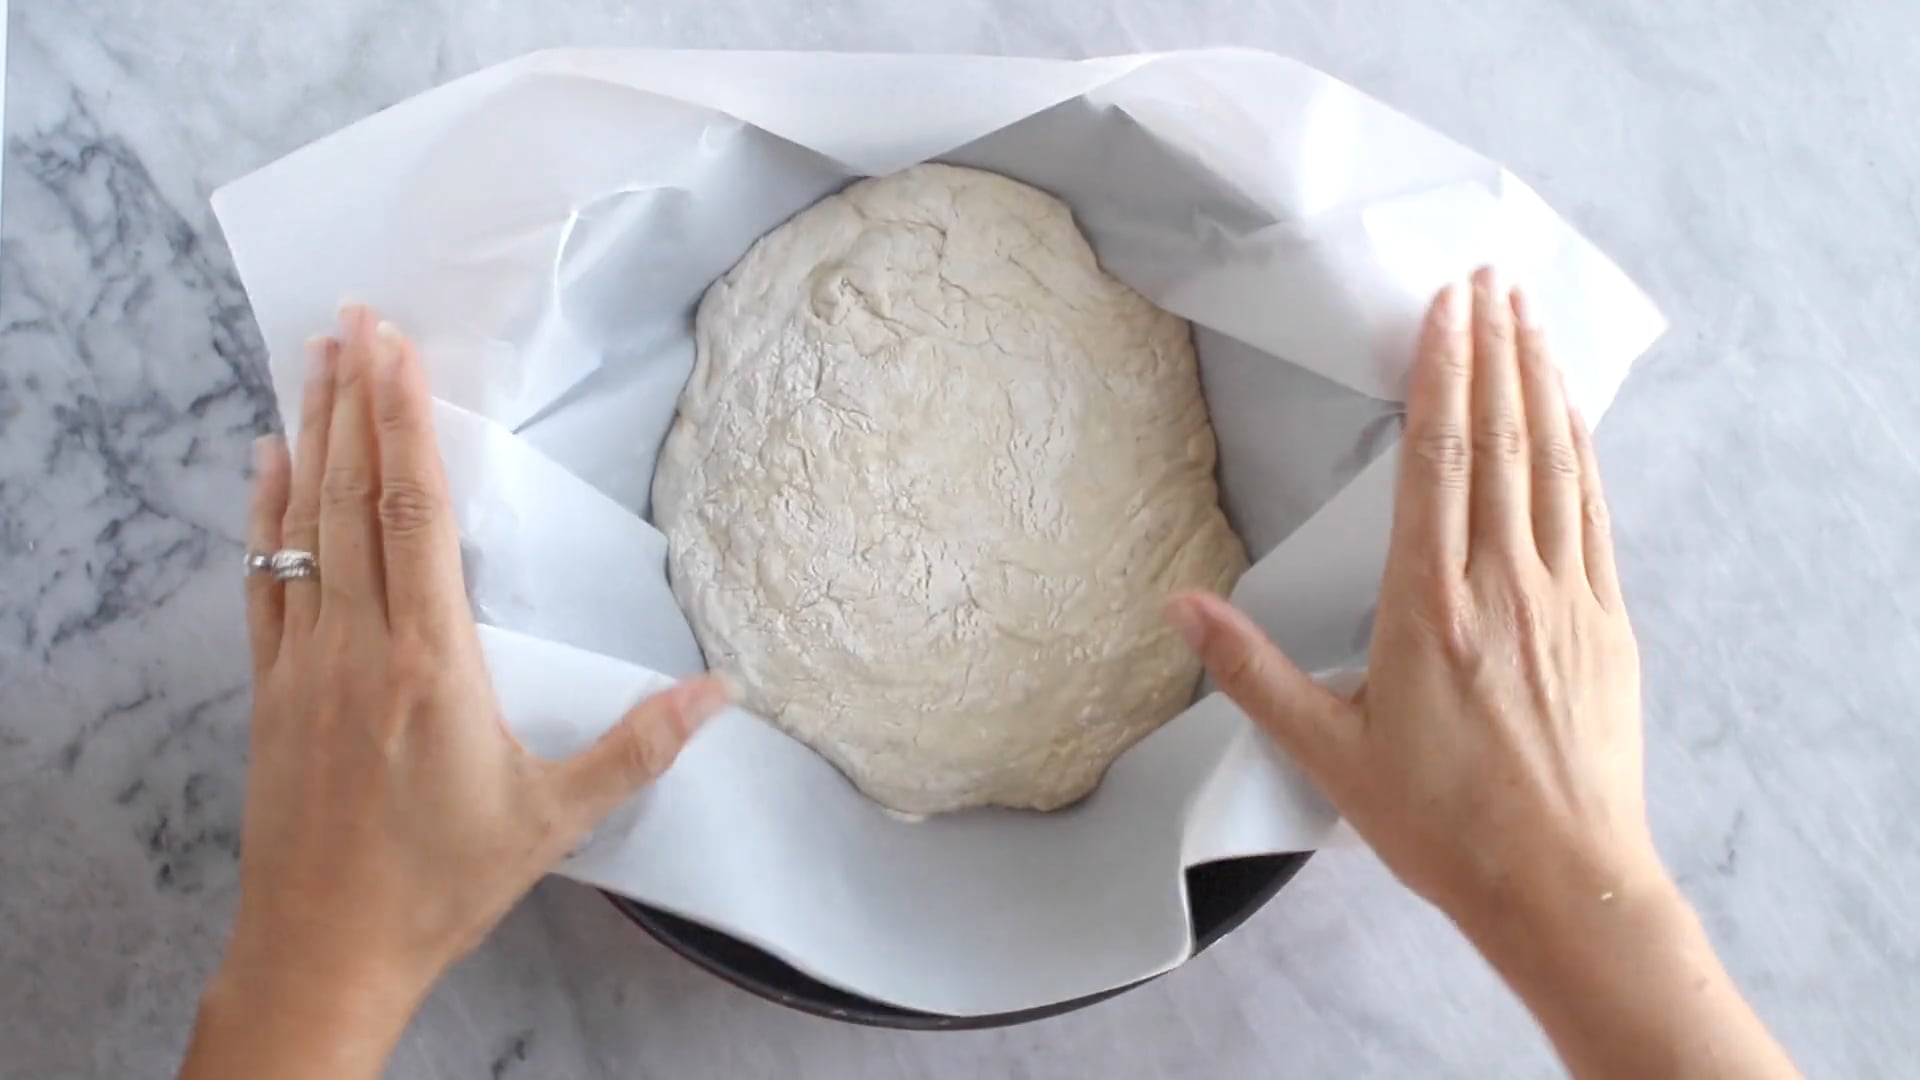 Screenshot from a video showing hands about to knead dough